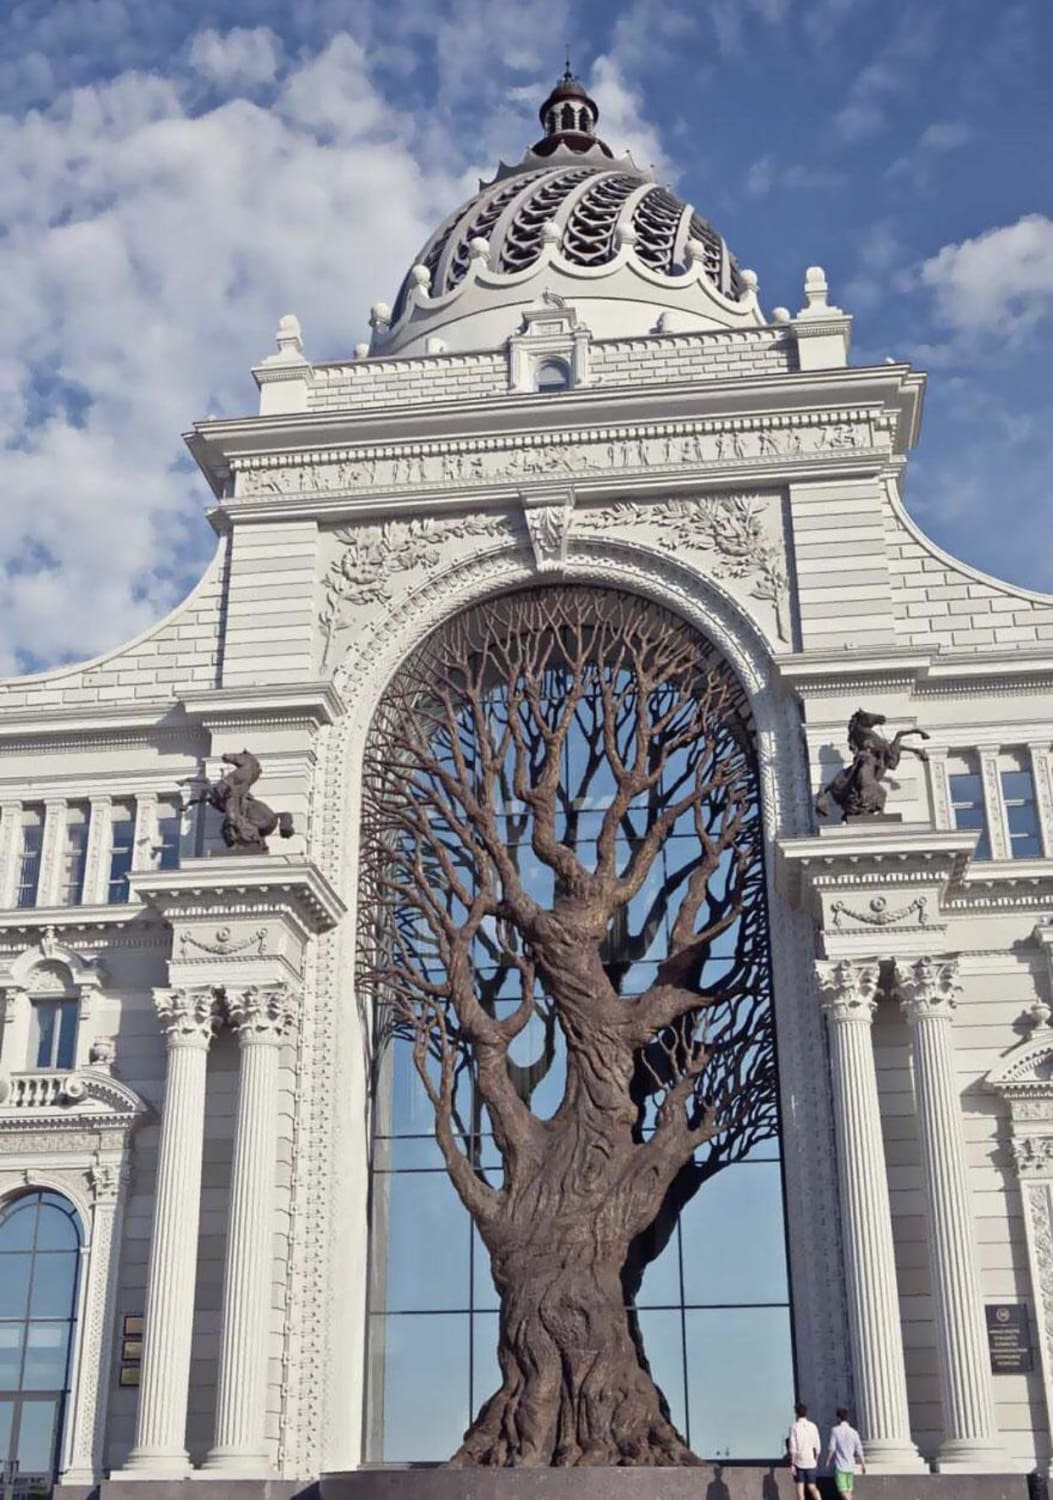 this is a giant iron tree built into the side of the russian mijistry of agriculture